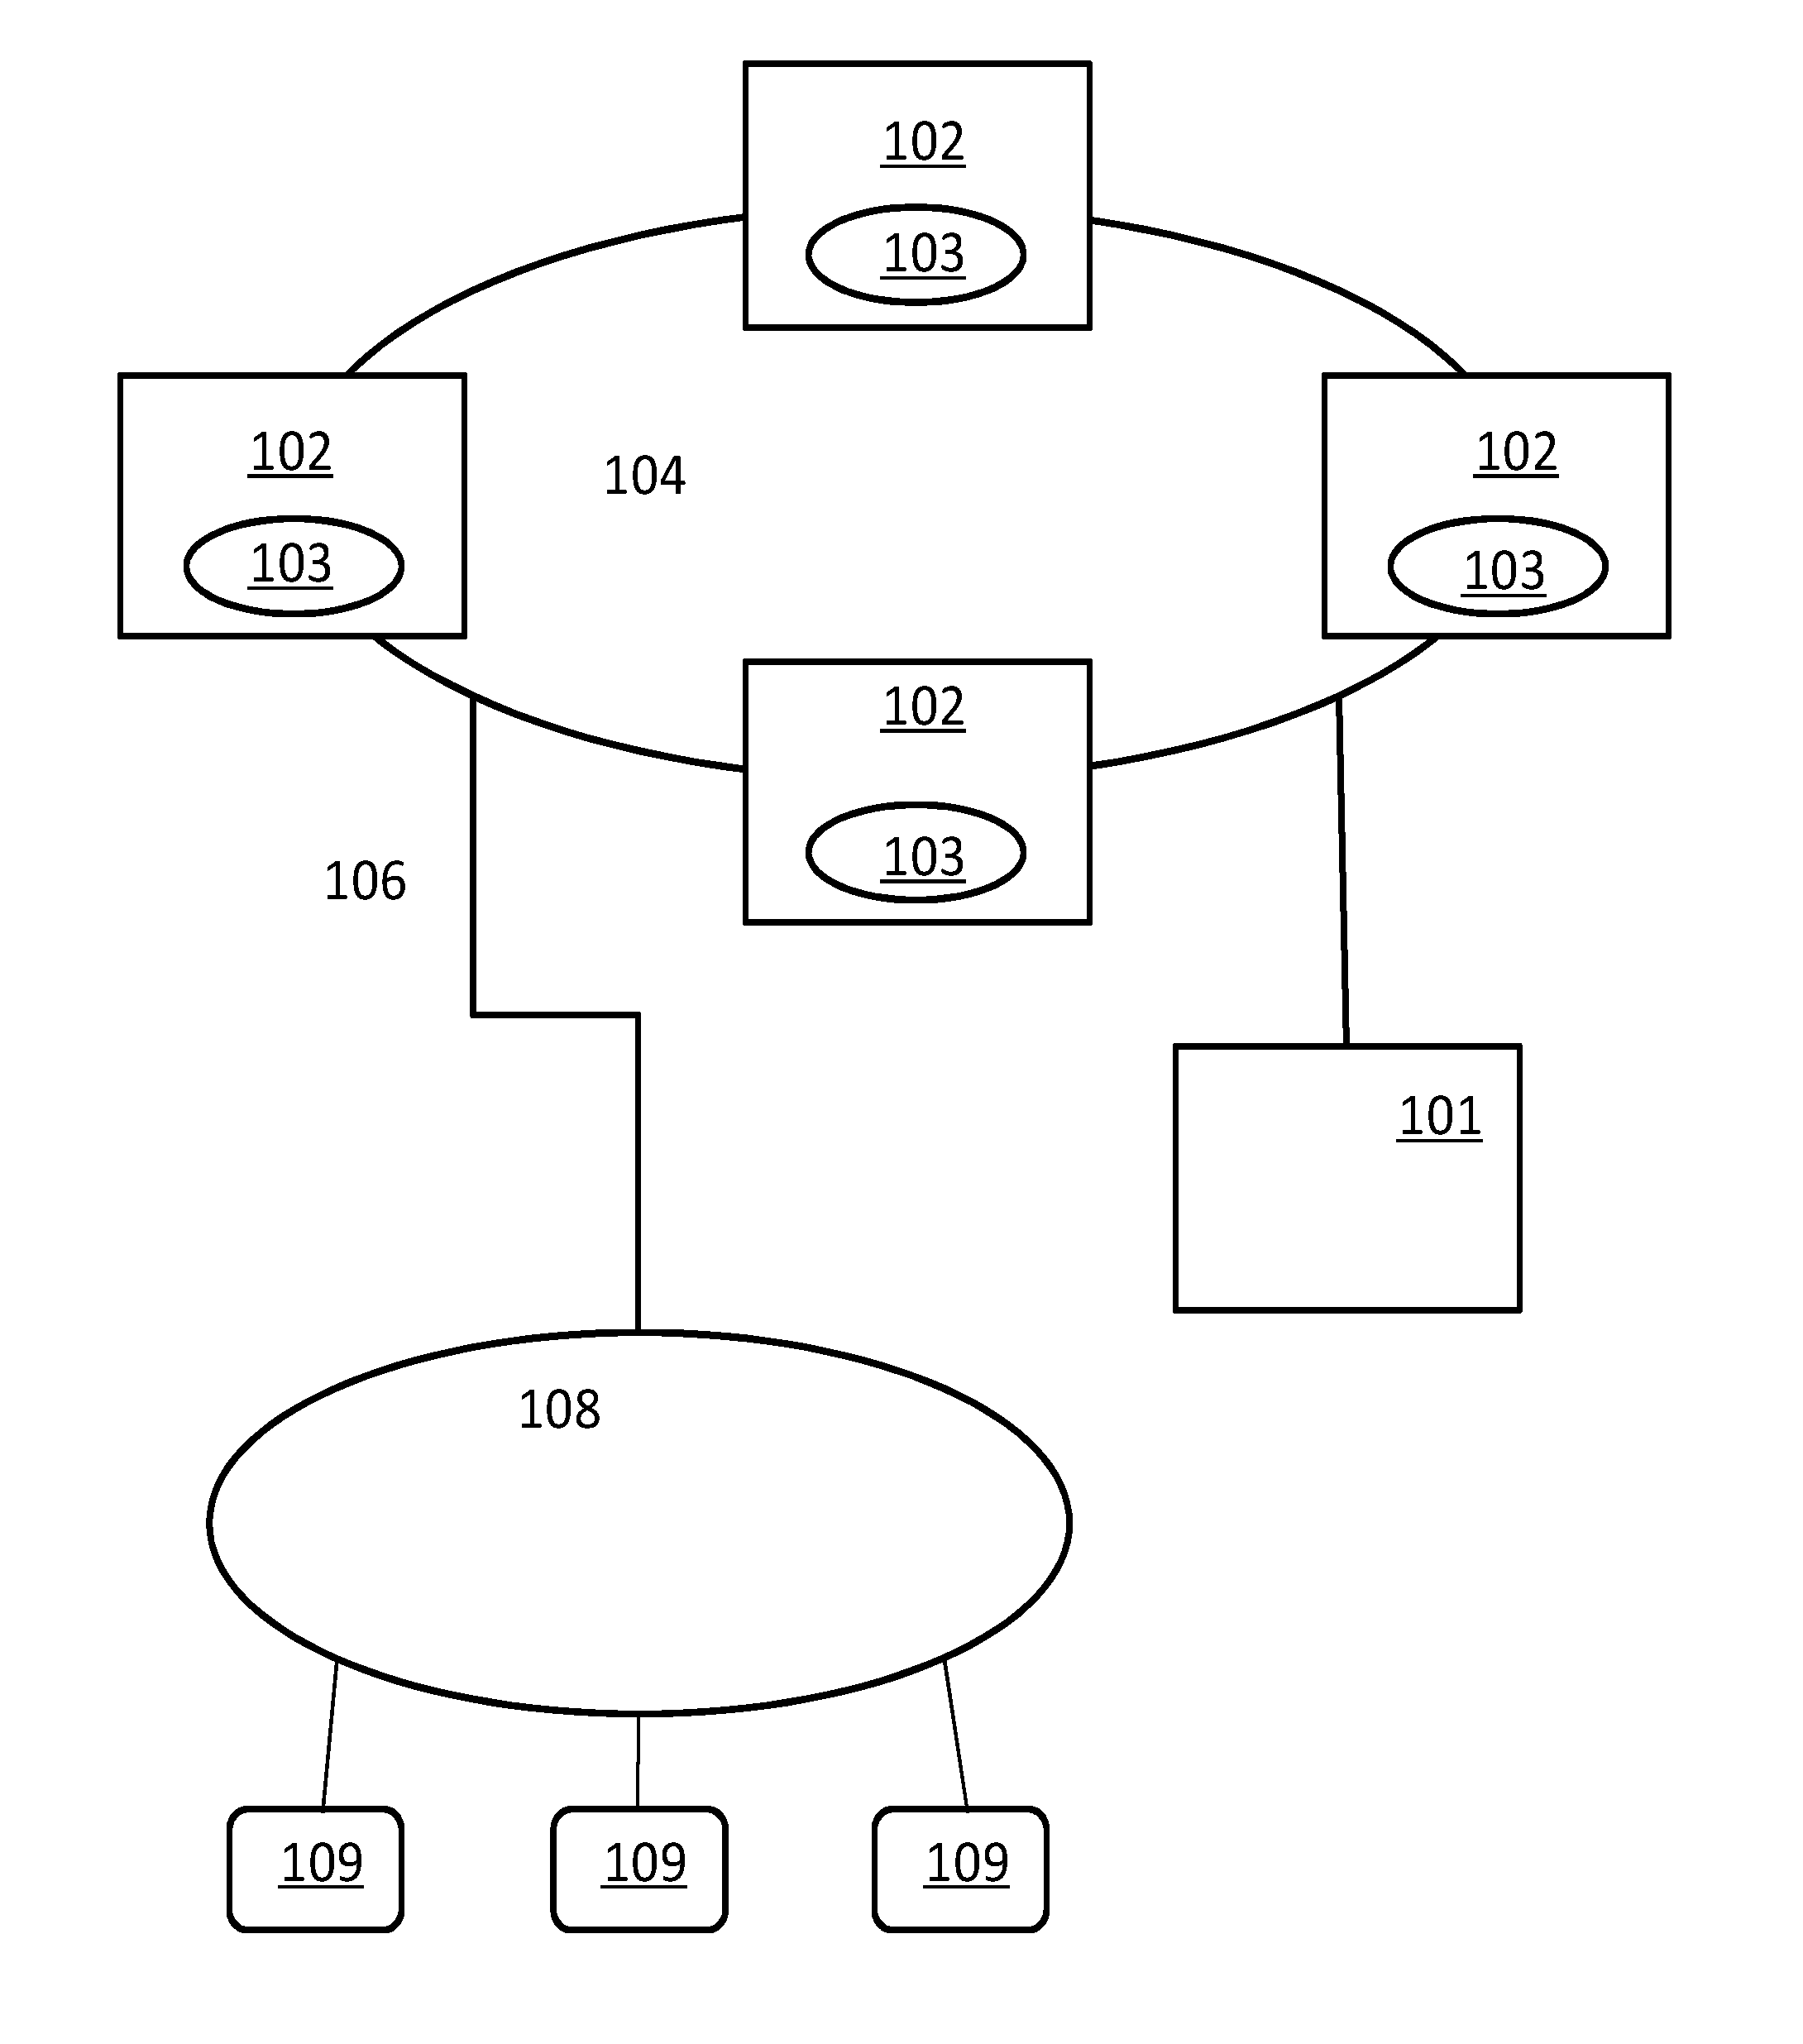 Method for operating cloud computing services and cloud computing information system